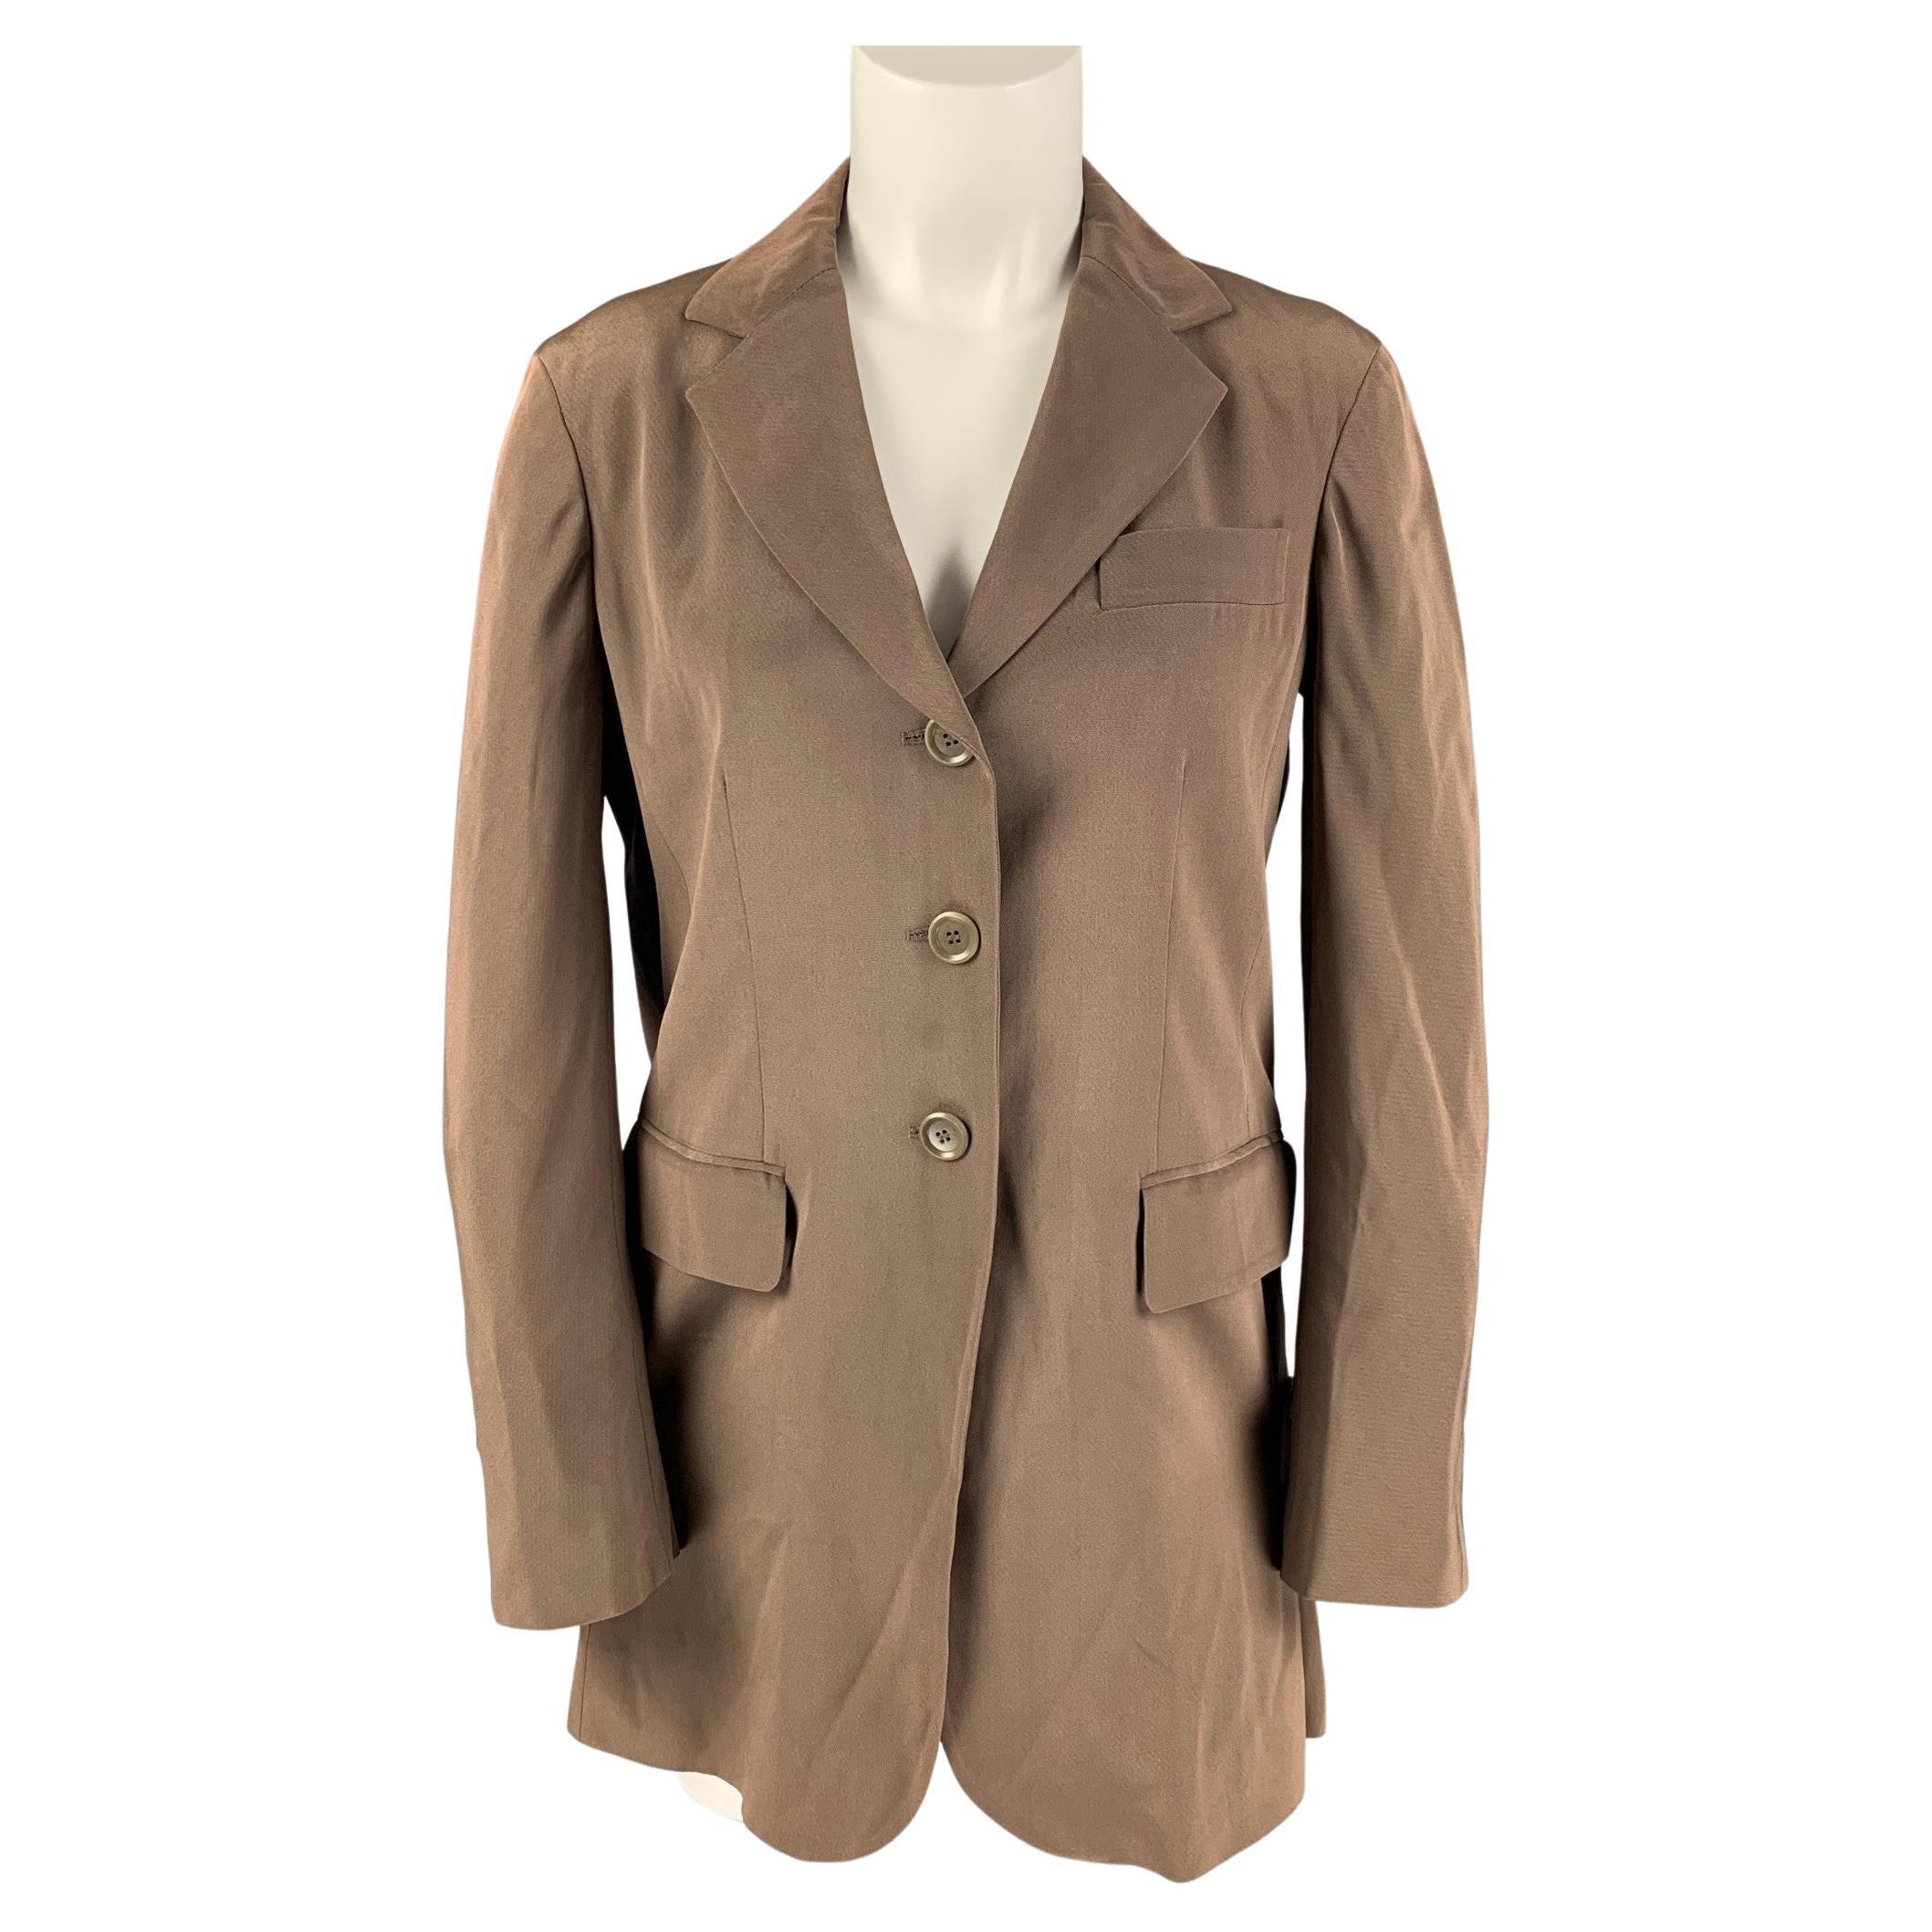 MOSCHINO Size 6 Taupe Acetate Blend Solid Jacket